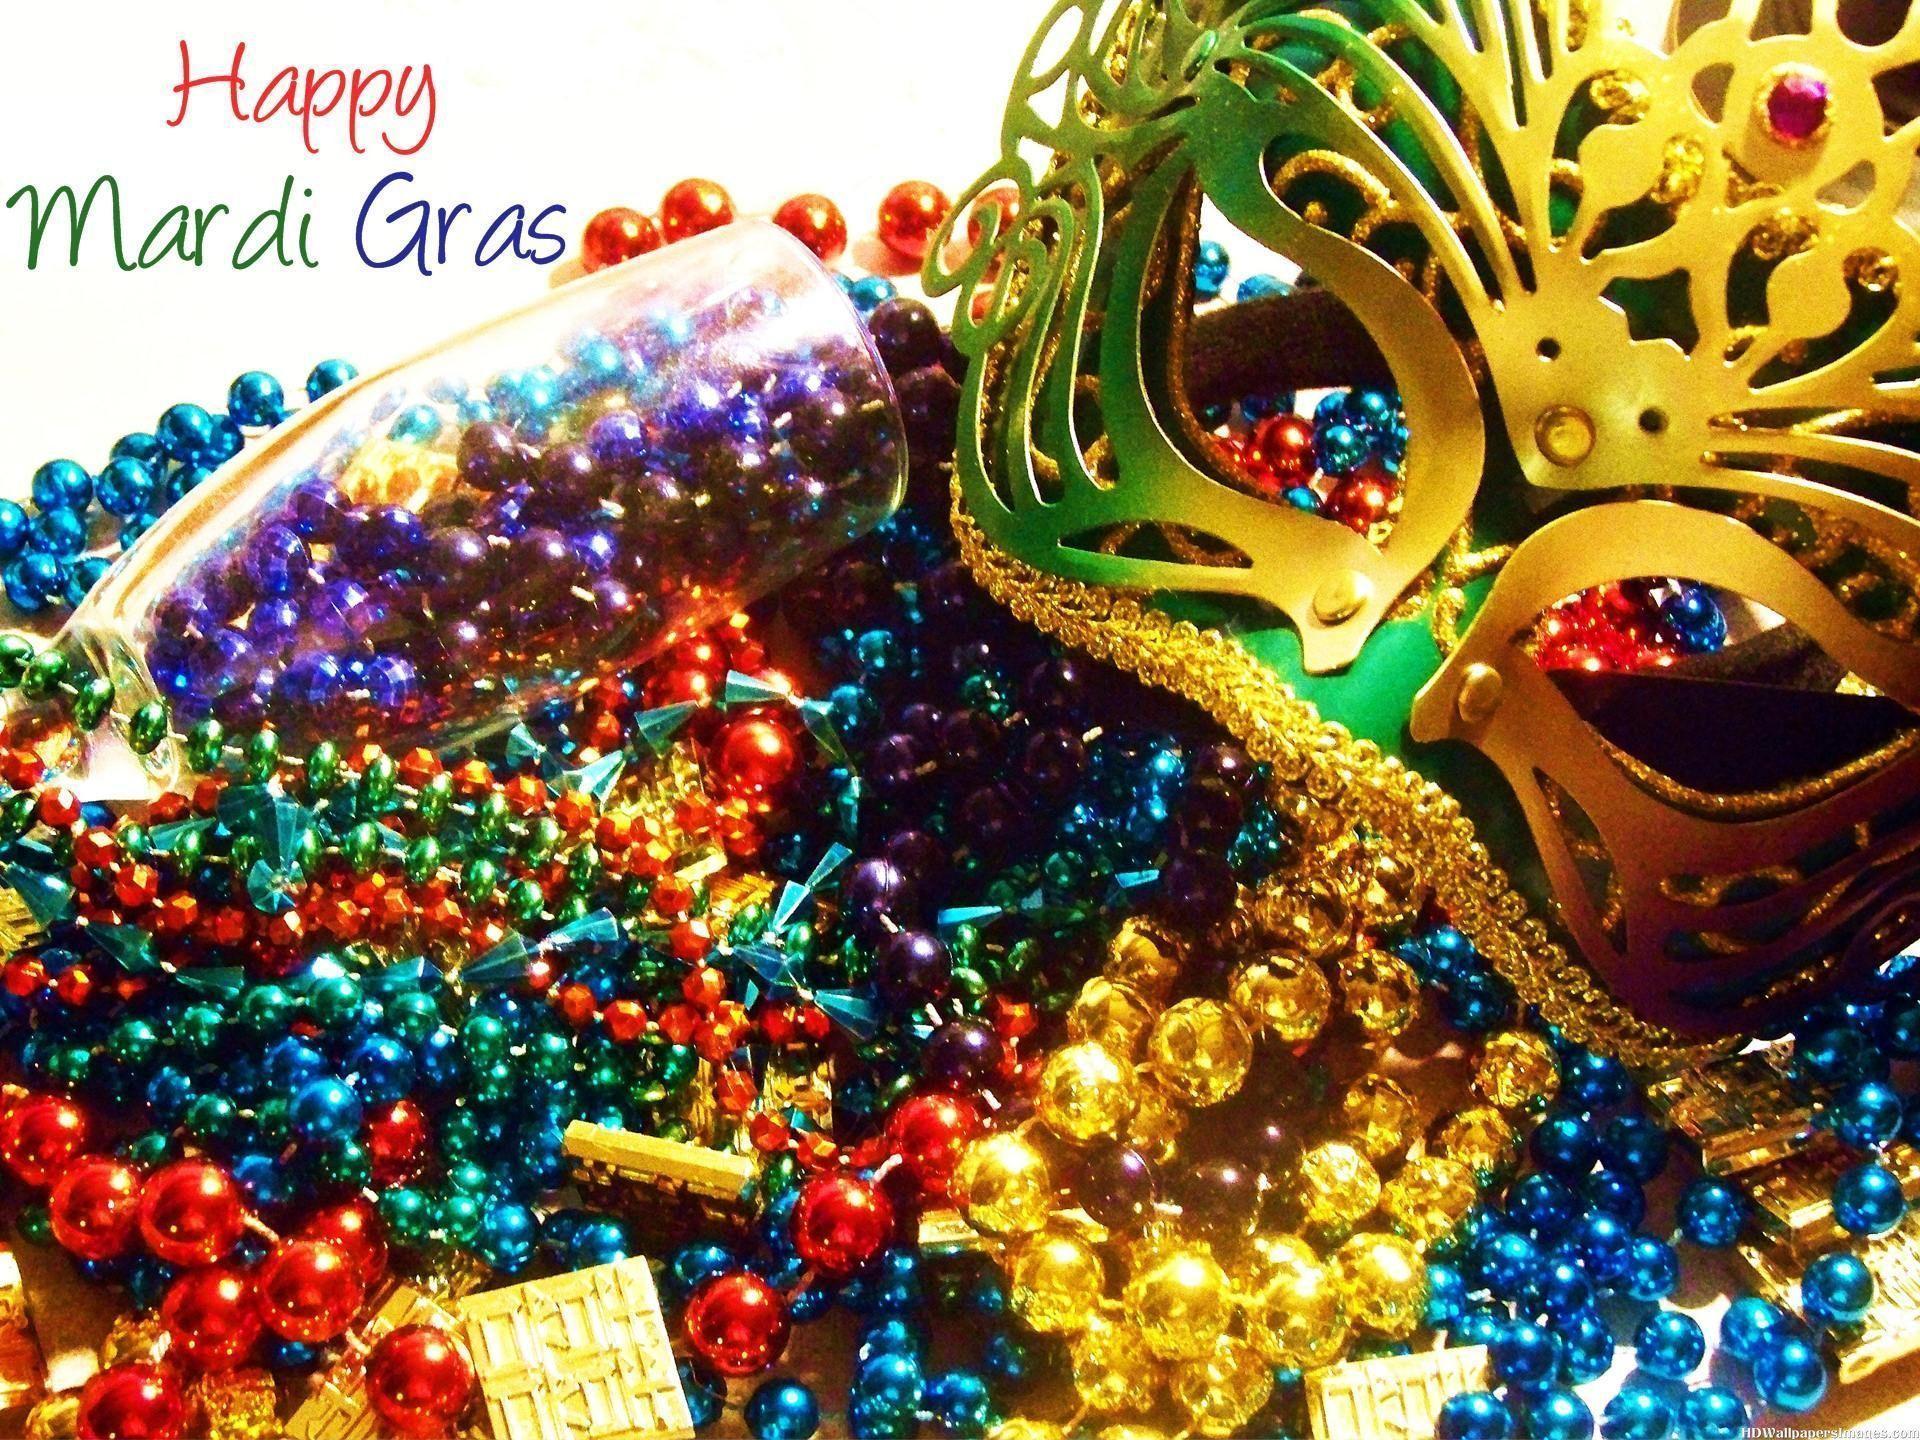 Mardi Gras Orleans Wishes Image. HD Wallpaper Image